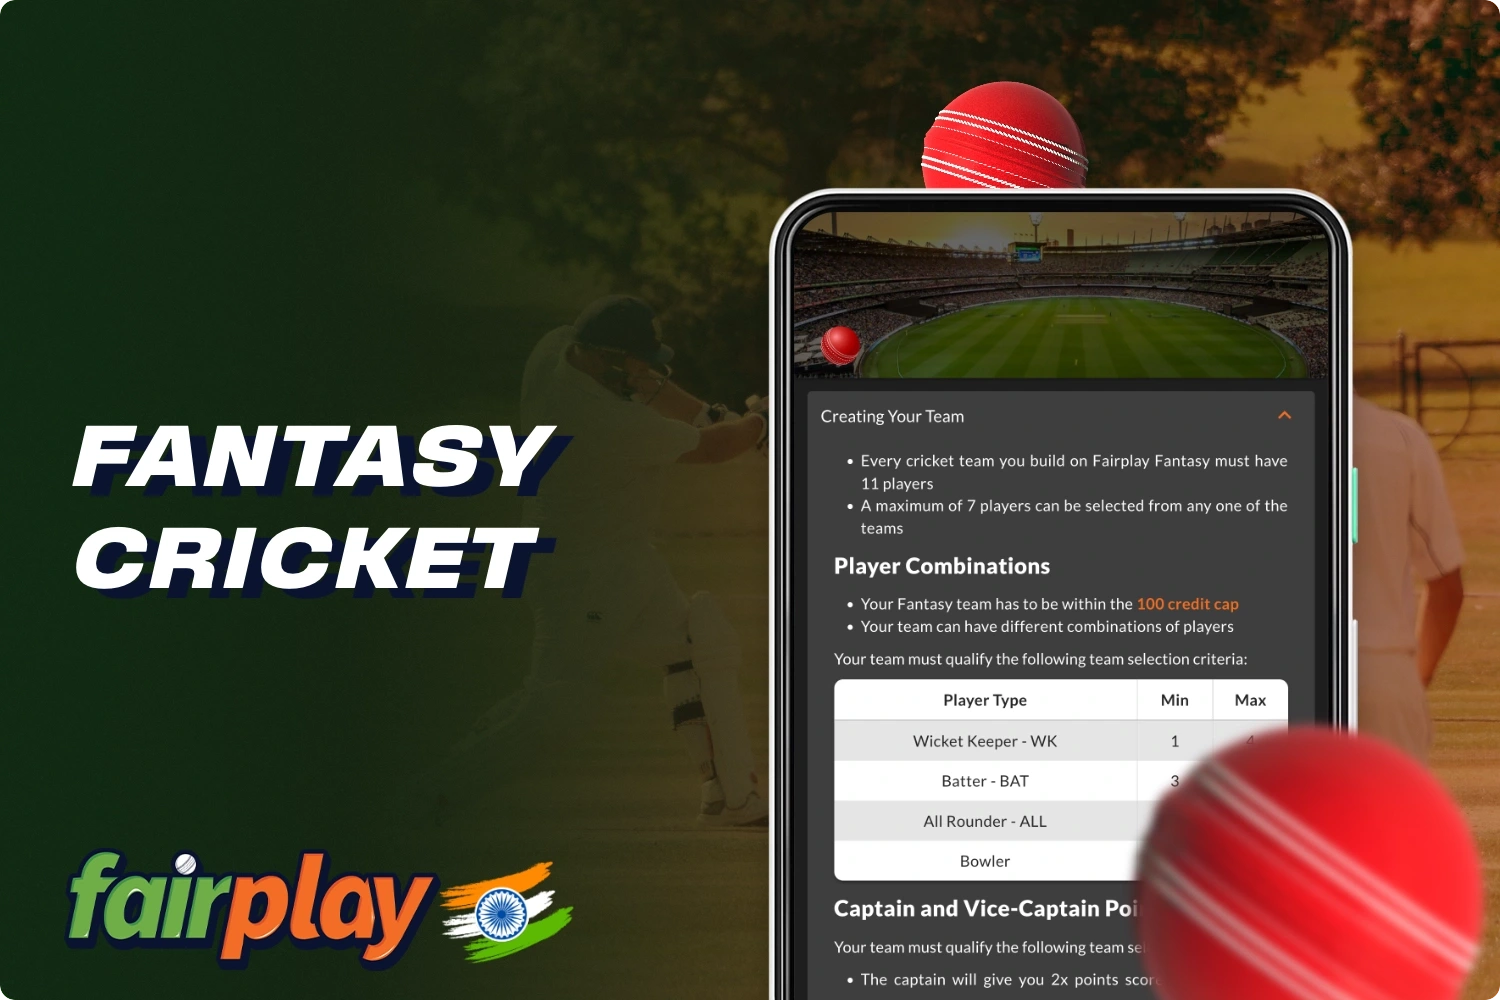 Together with Fairplay, users from India can bet on Fantasy cricket